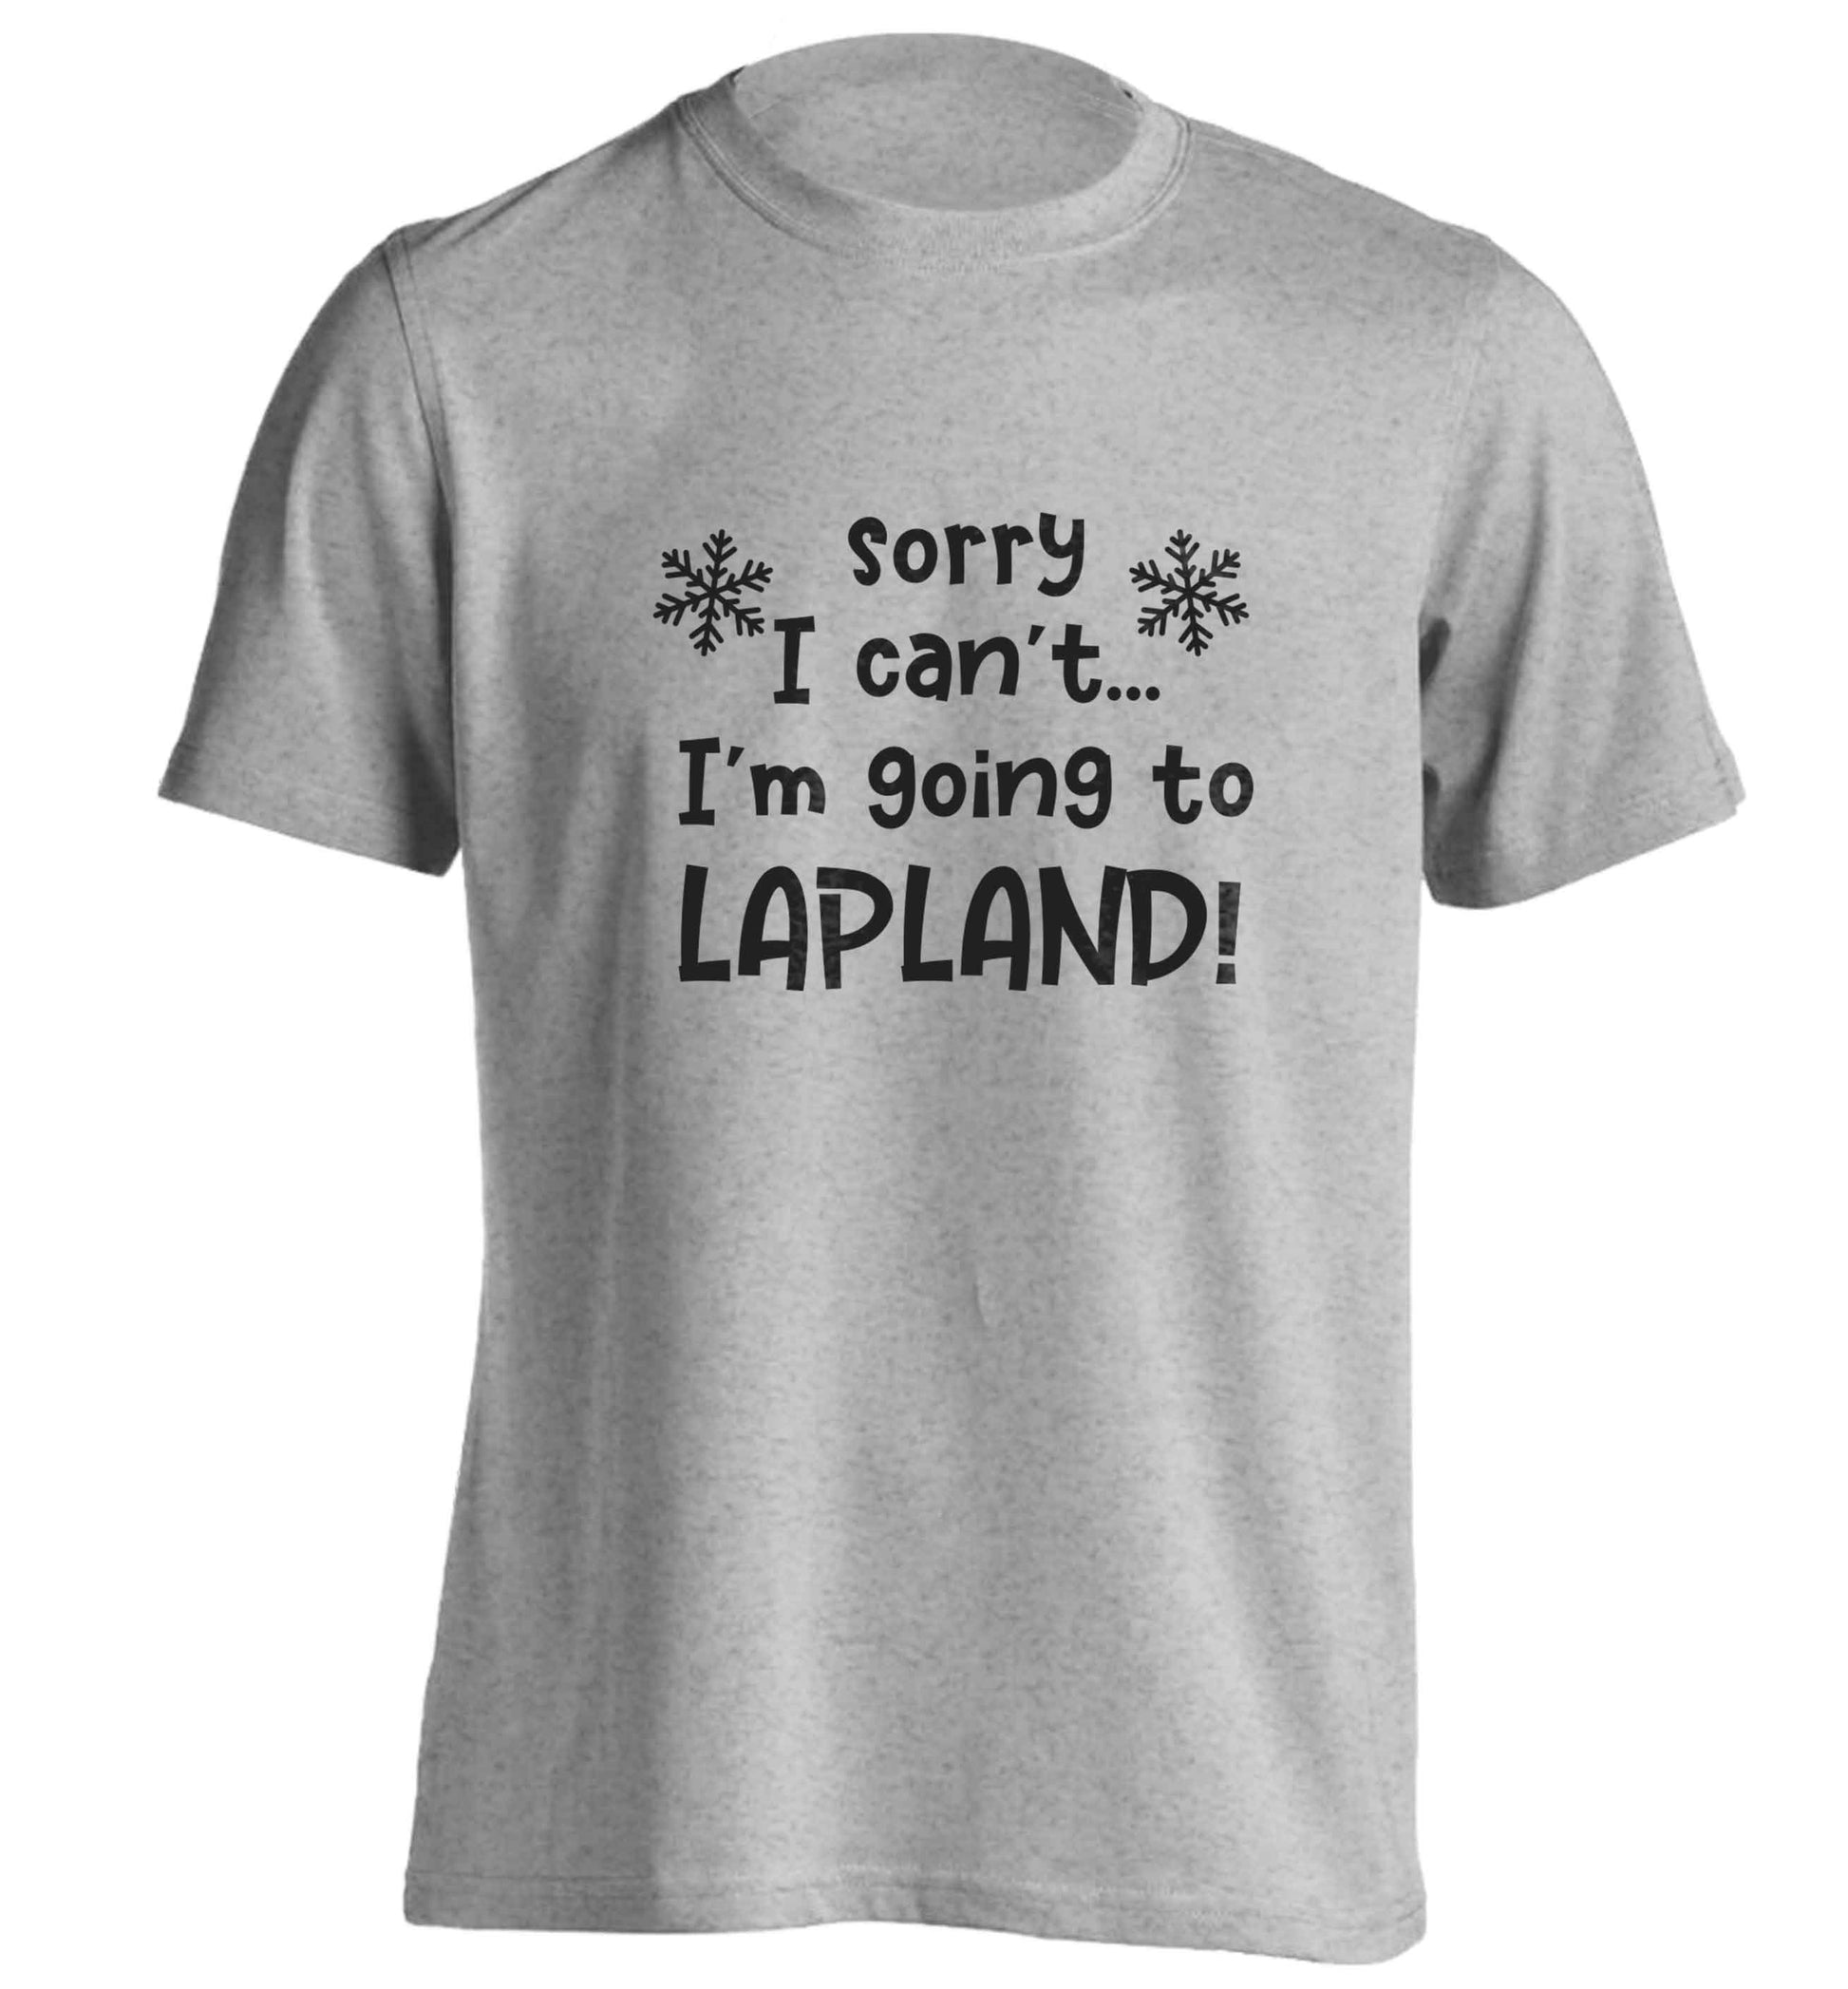 Sorry I can't I'm going to Lapland adults unisex grey Tshirt 2XL